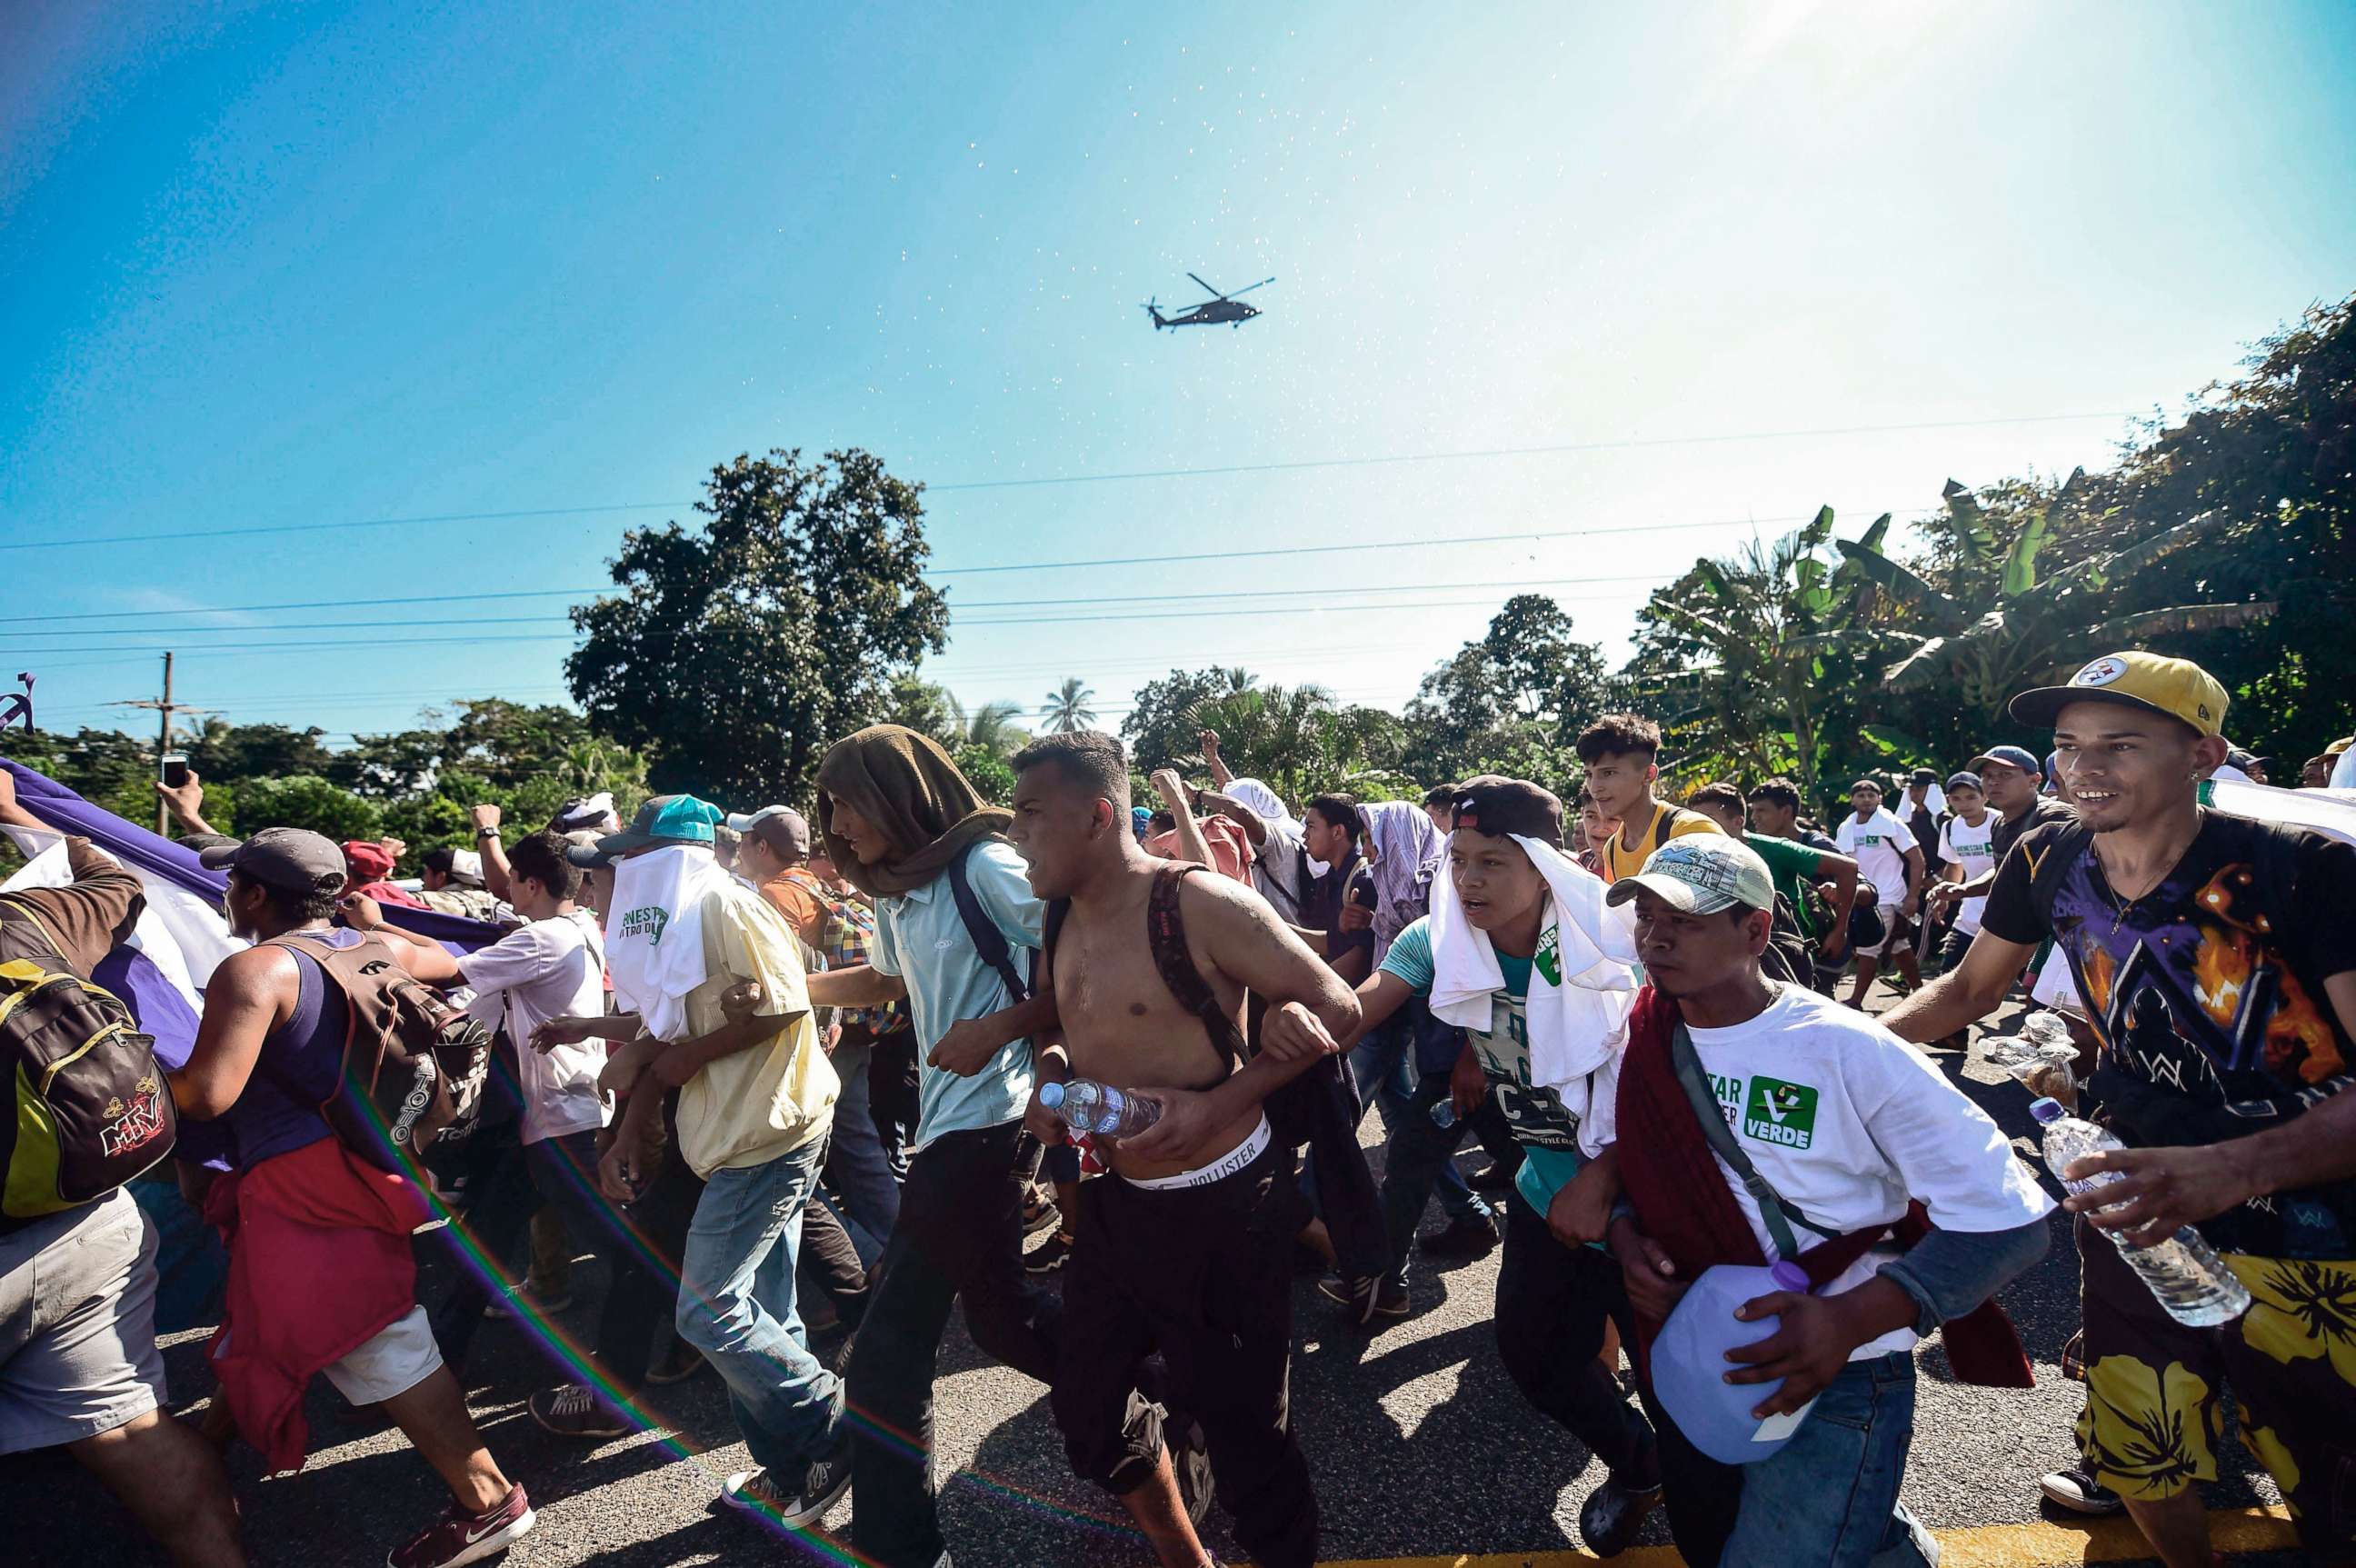 PHOTO: Honduran migrants take part in a caravan heading to the U.S., on the road linking Ciudad Hidalgo and Tapachula, Chiapas state, Mexico, Oct. 21, 2018.